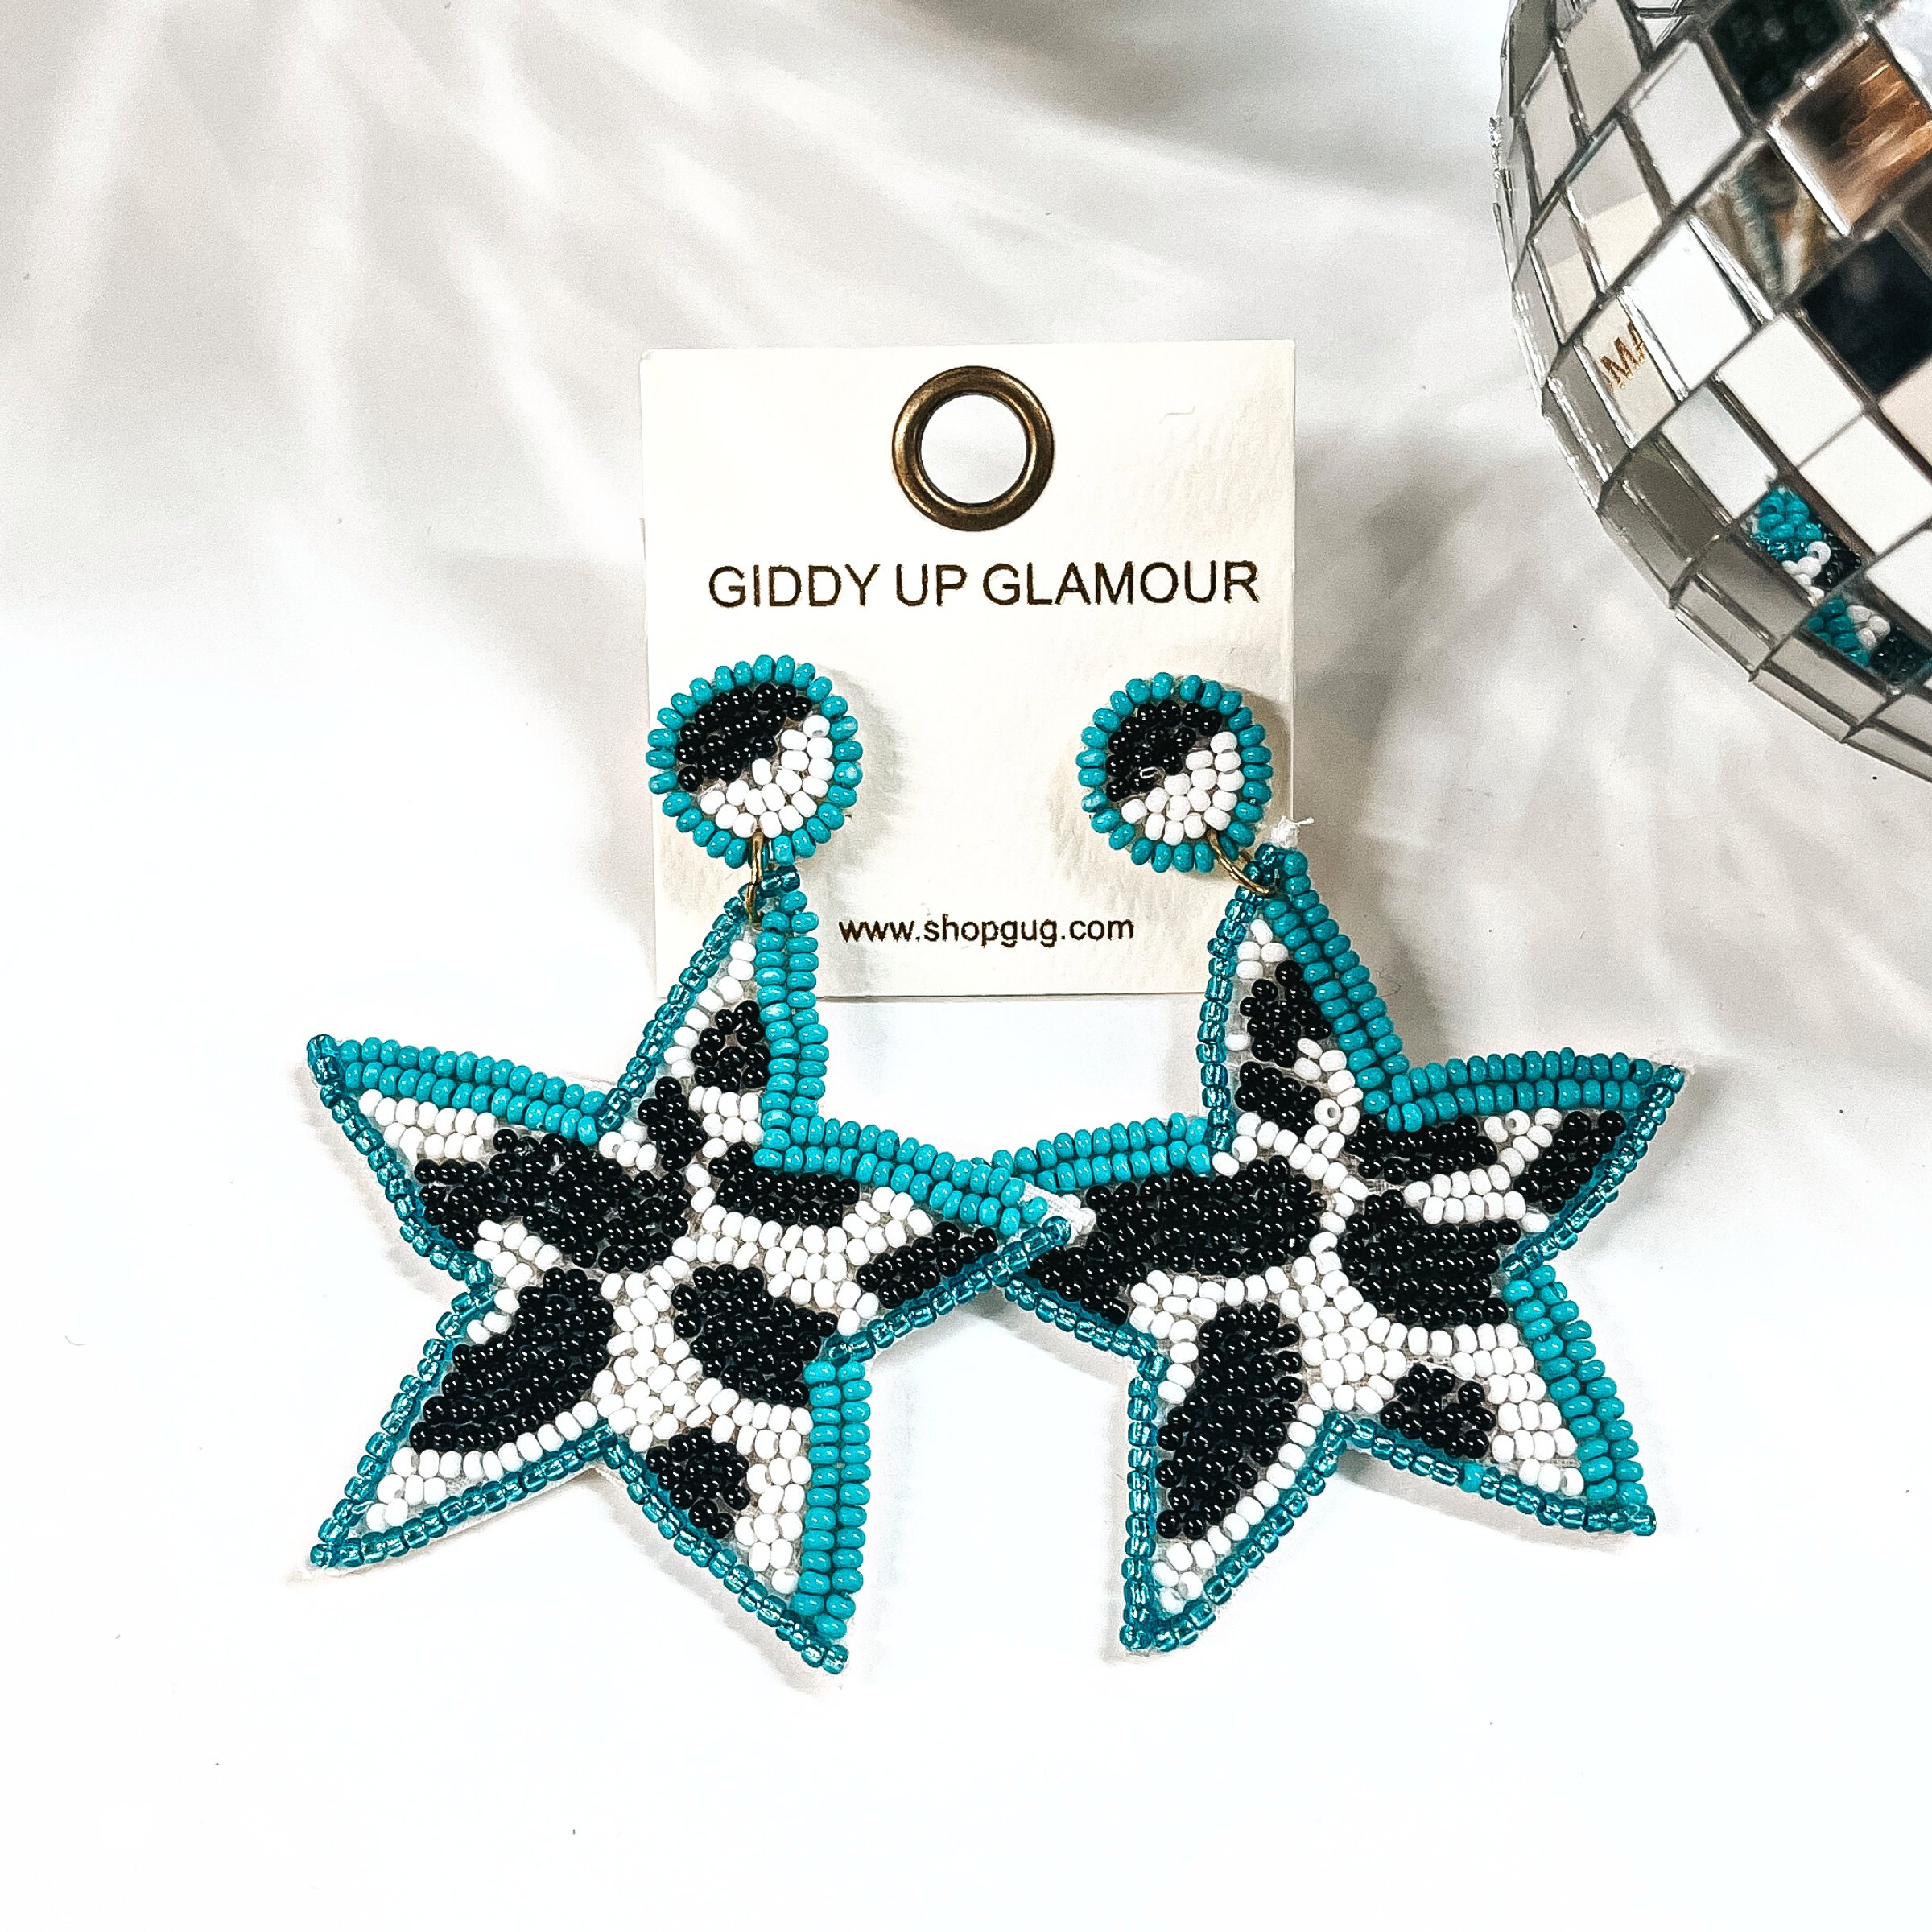 These are beaded star shape earrings in turquoise, black, and white. The center  is in black and white cow print, and turquoise beads all around. The post  back is half black and white, with turquoise beads all around as well. These  earrings are placed on an ivory Giddy Up Glamour earring card. These earrings  are taken on a white background with a disco ball in the side as decor.